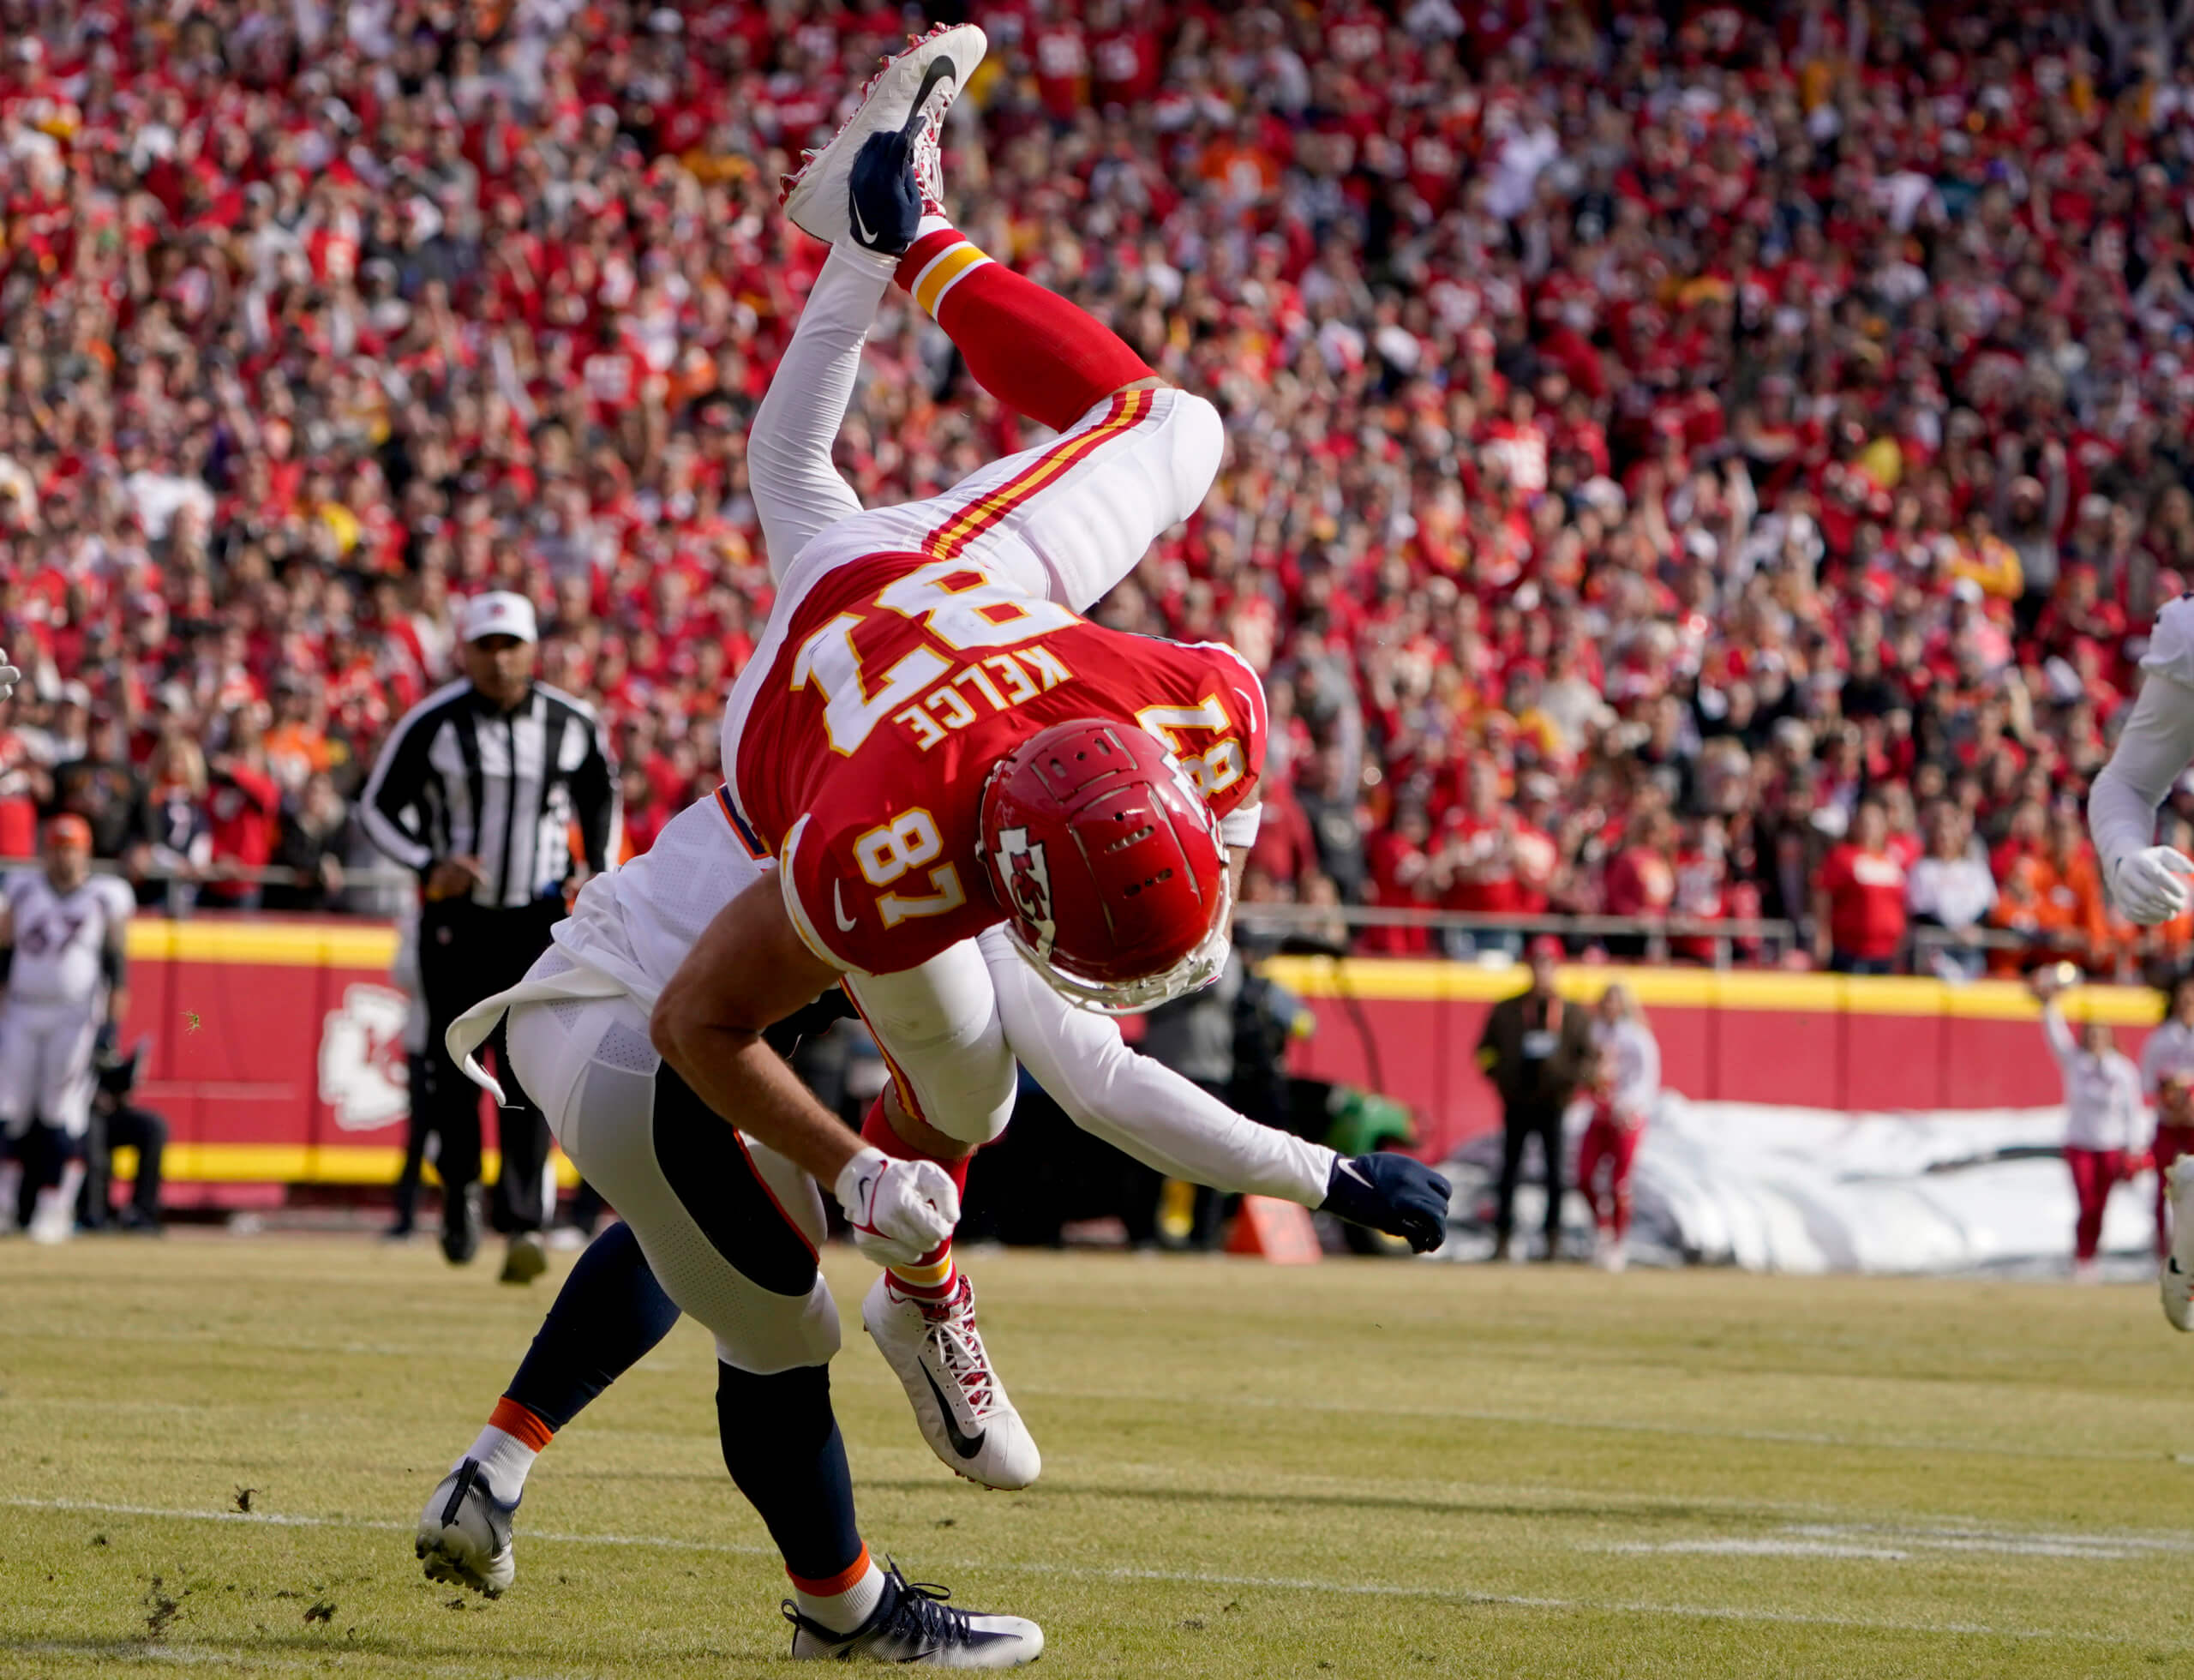 Tickets for the Bengals vs. Kansas City Chiefs game go on sale